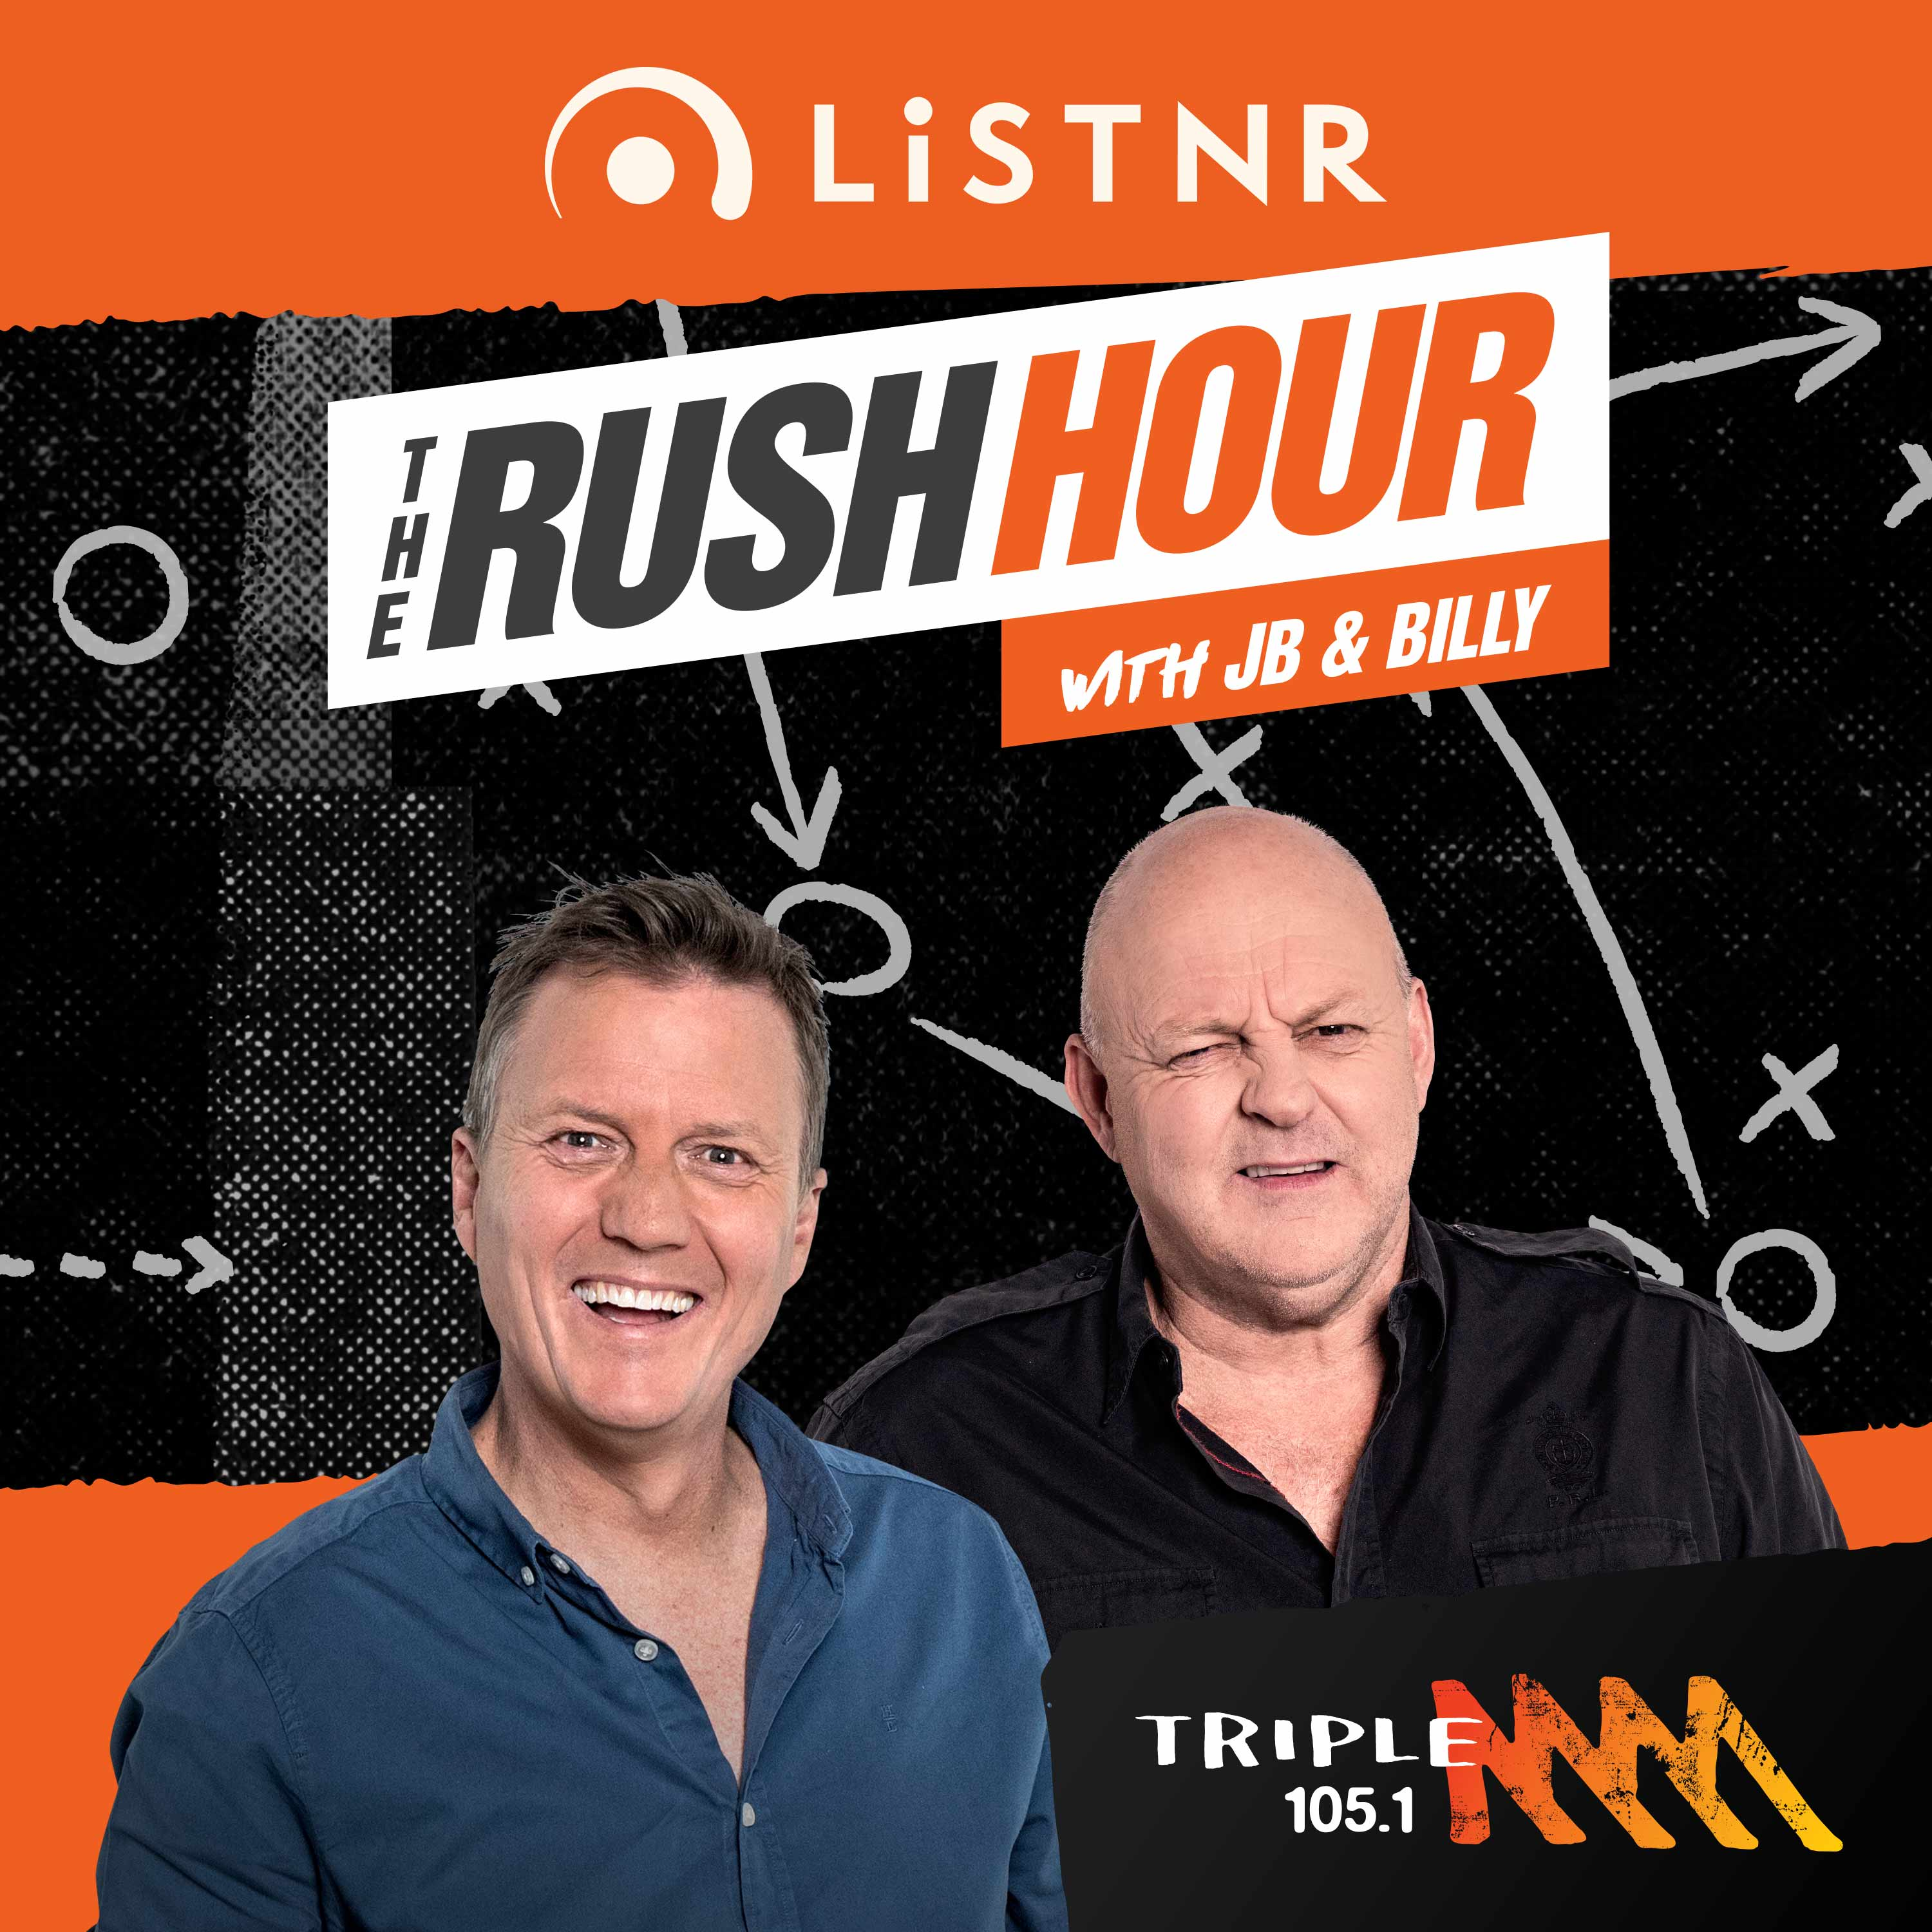 We're back!, John Hastings' Ashes 11, Bill got papped - The Rush Hour Catch Up podcast - Monday 15th July 2019